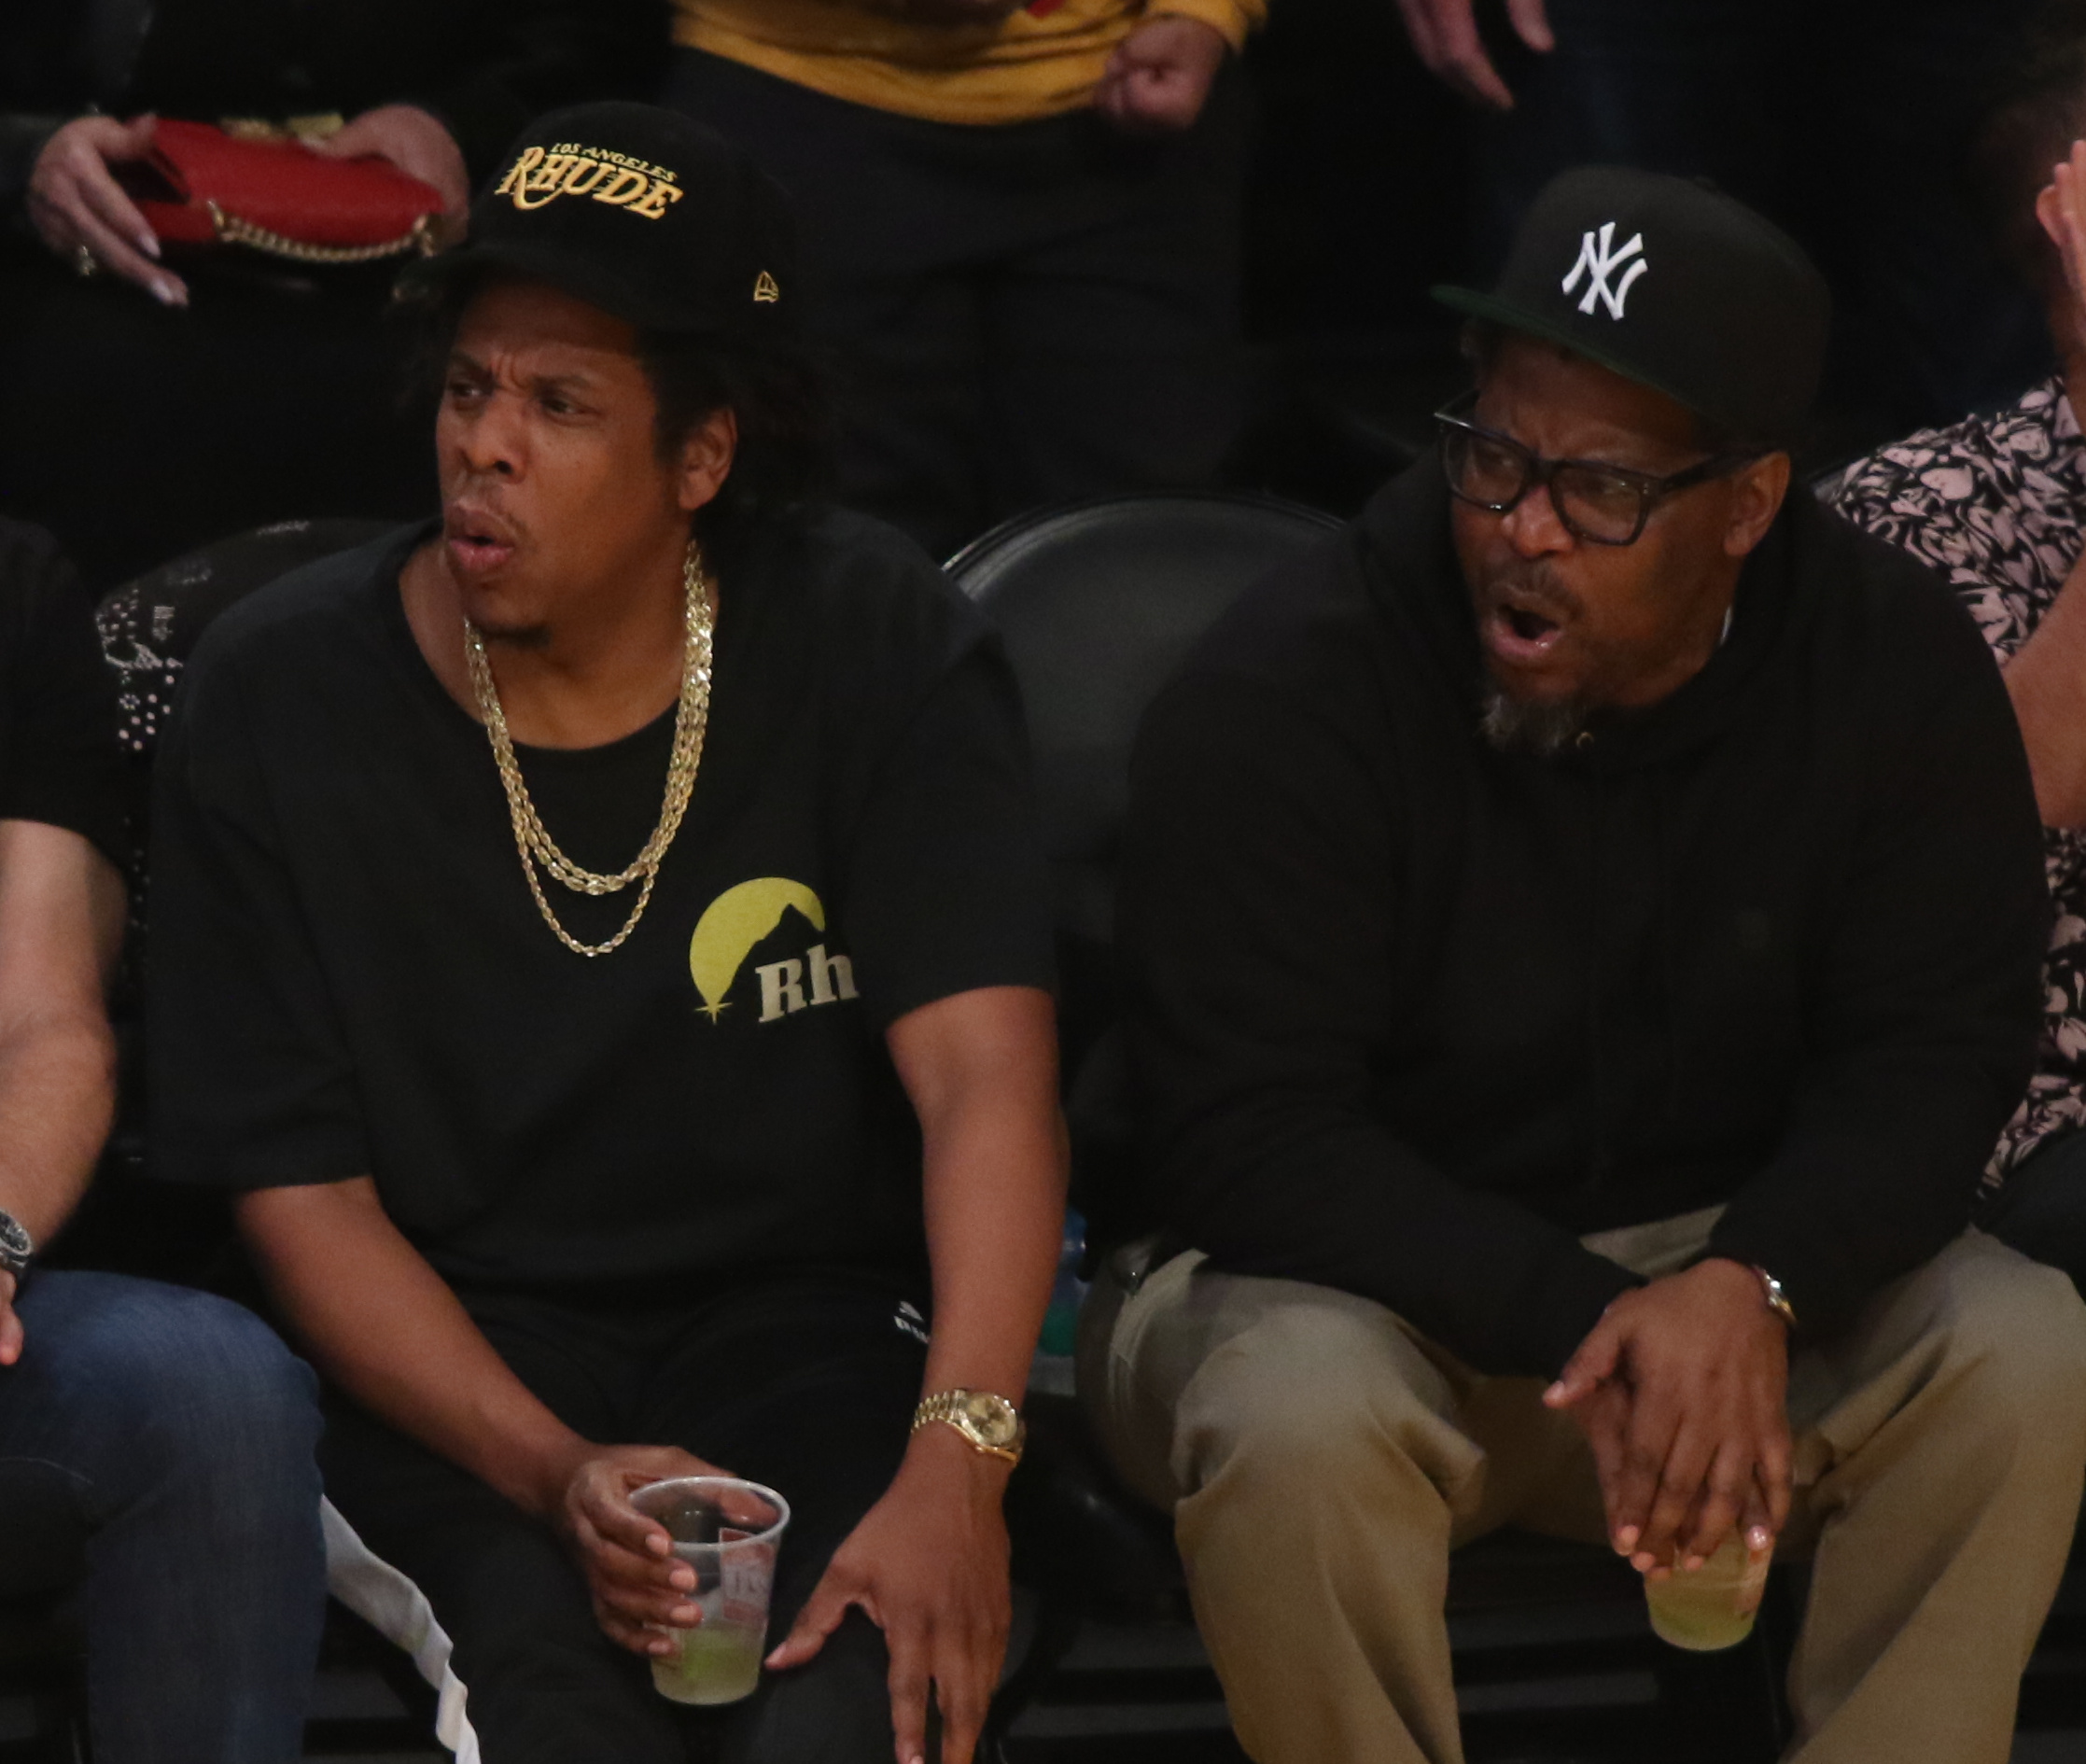 Jay-Z Has A Guys Night Out At The Lakers Game